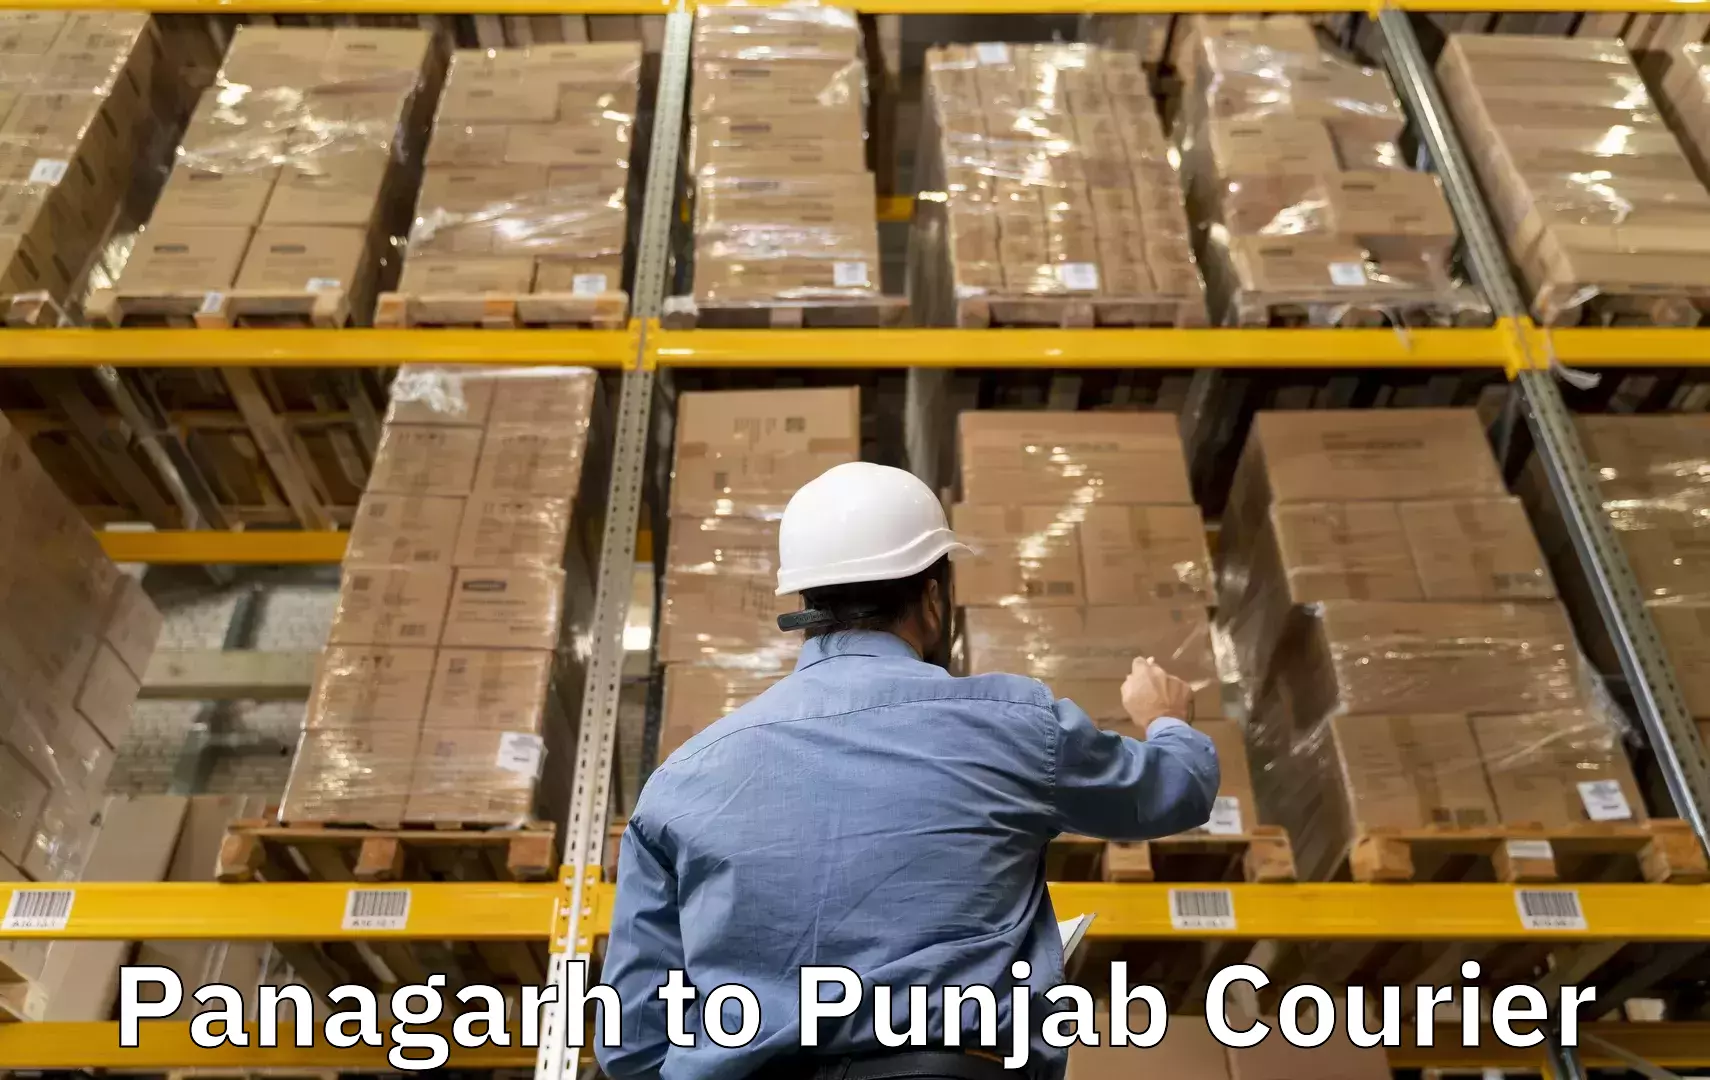 Excess baggage transport Panagarh to IIT Ropar